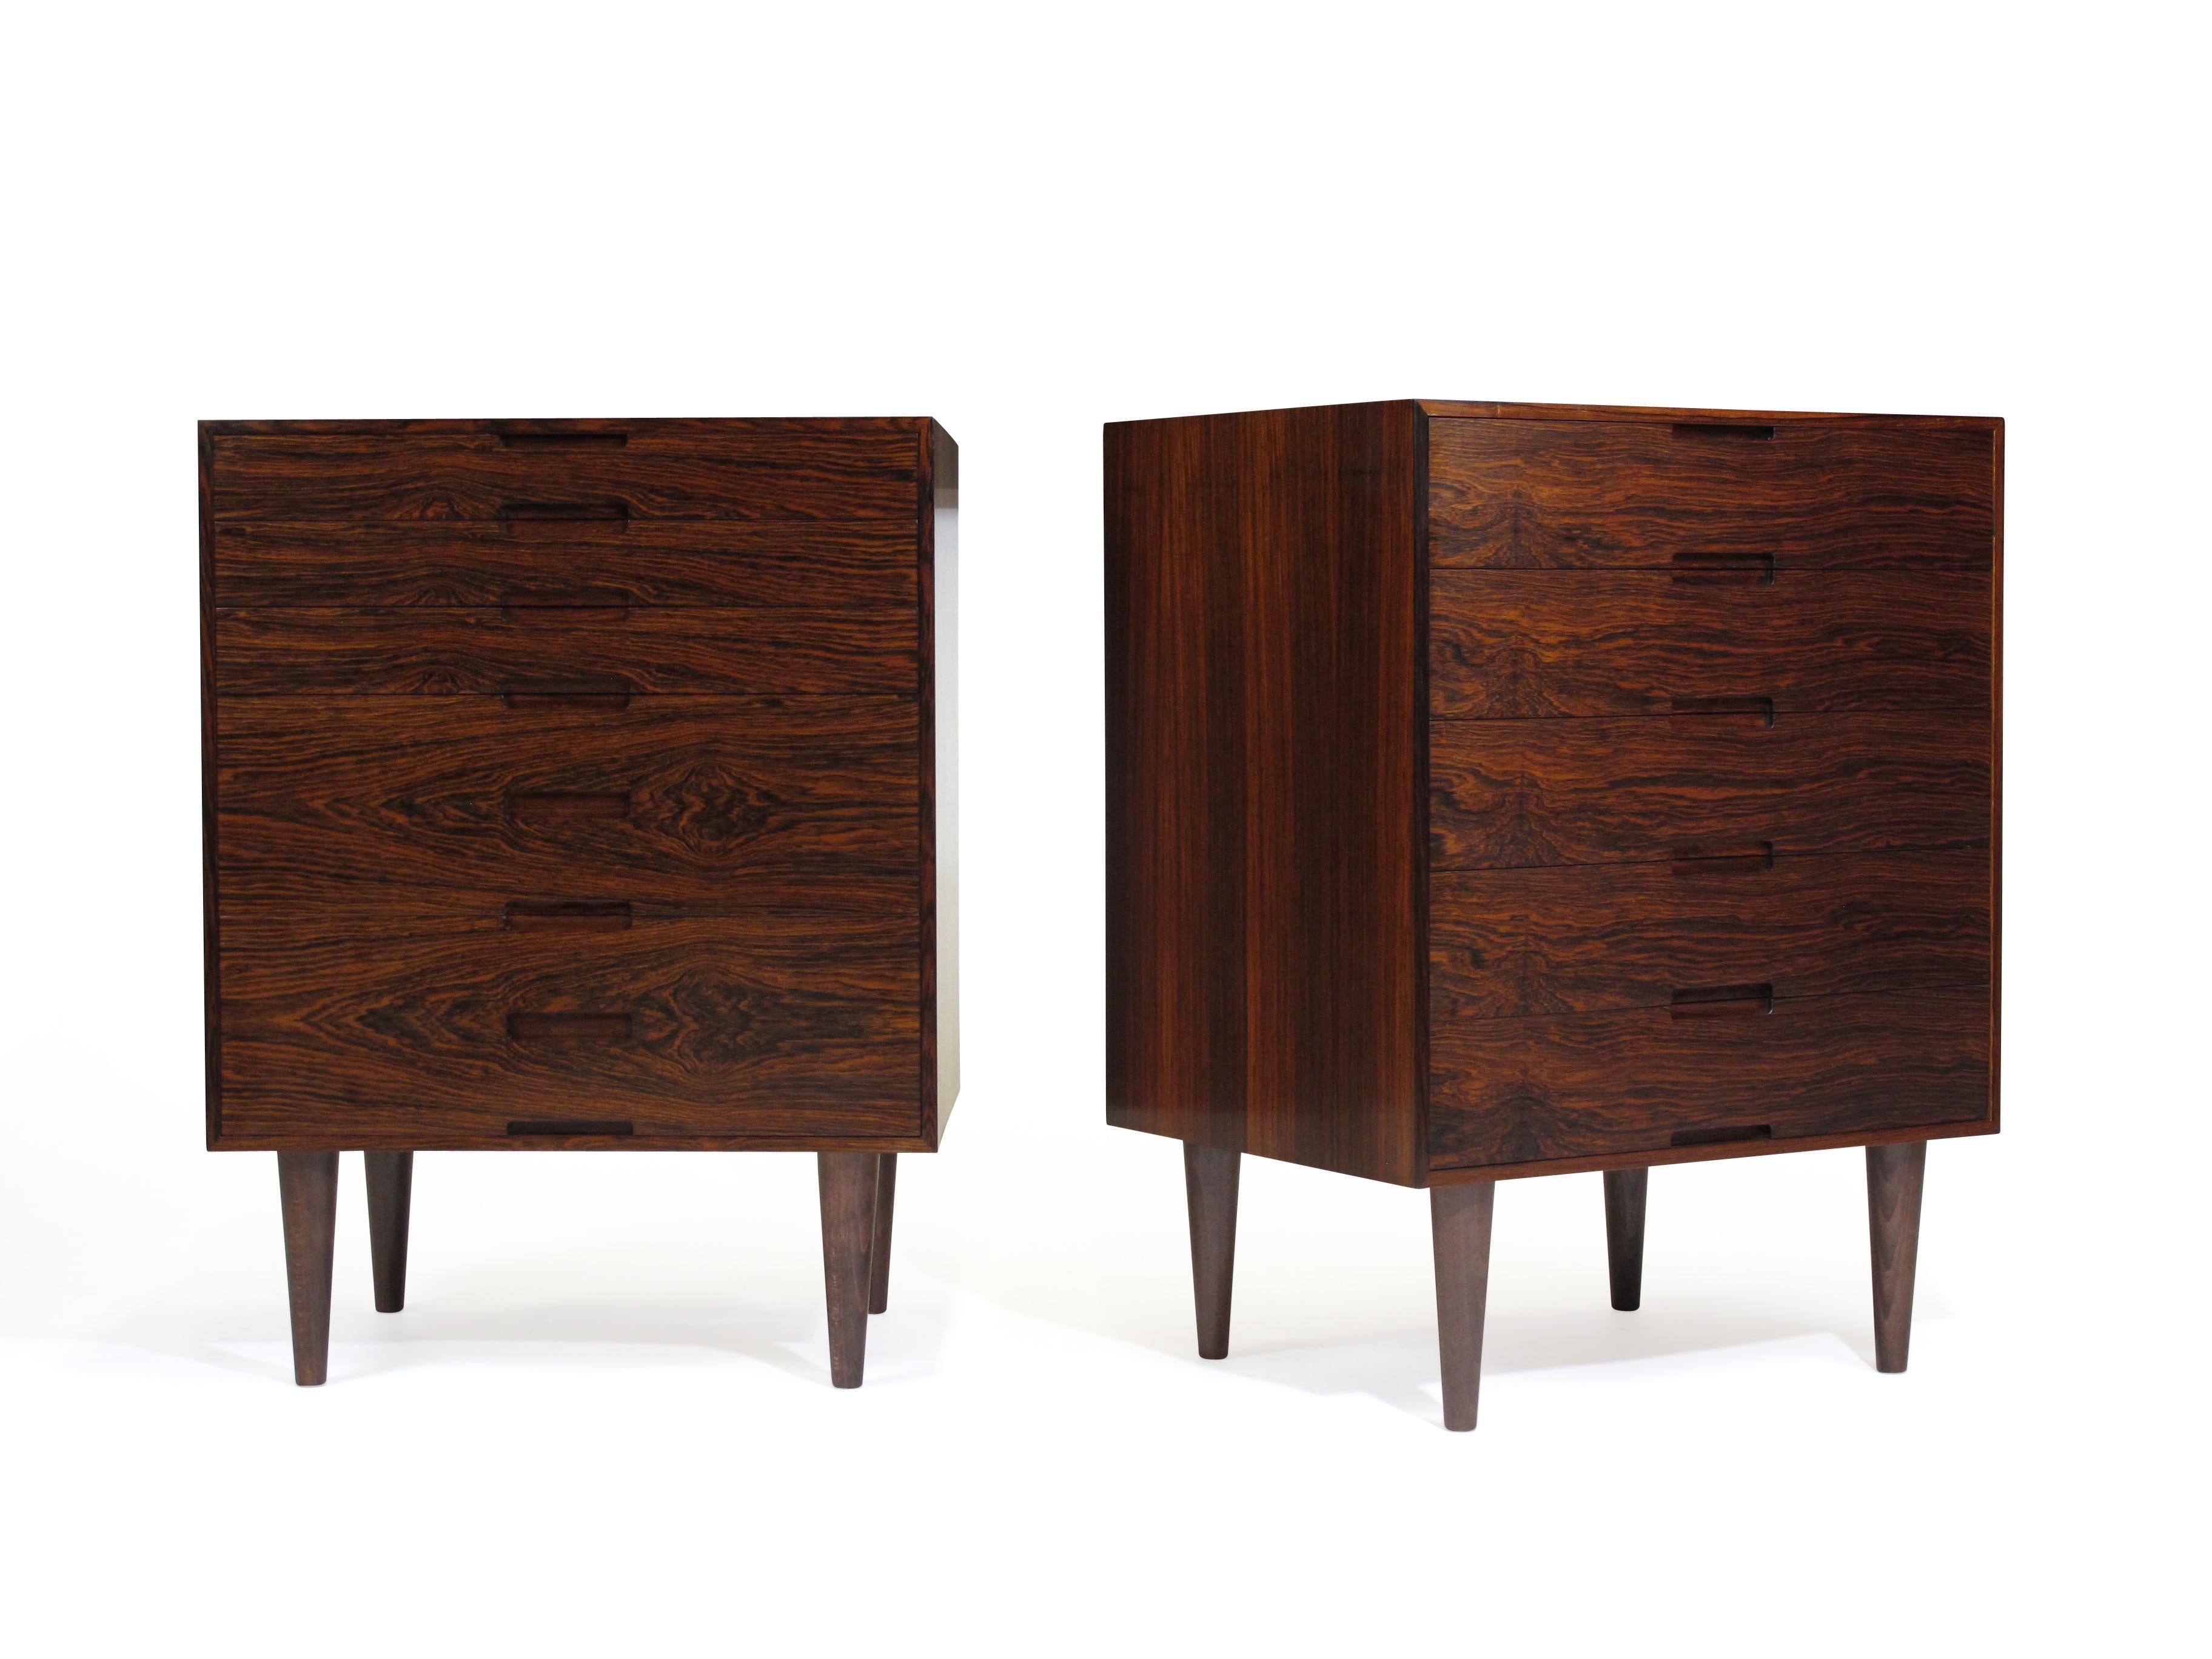 20th Century Brazilian Rosewood Nightstand Cabinets, a Pair